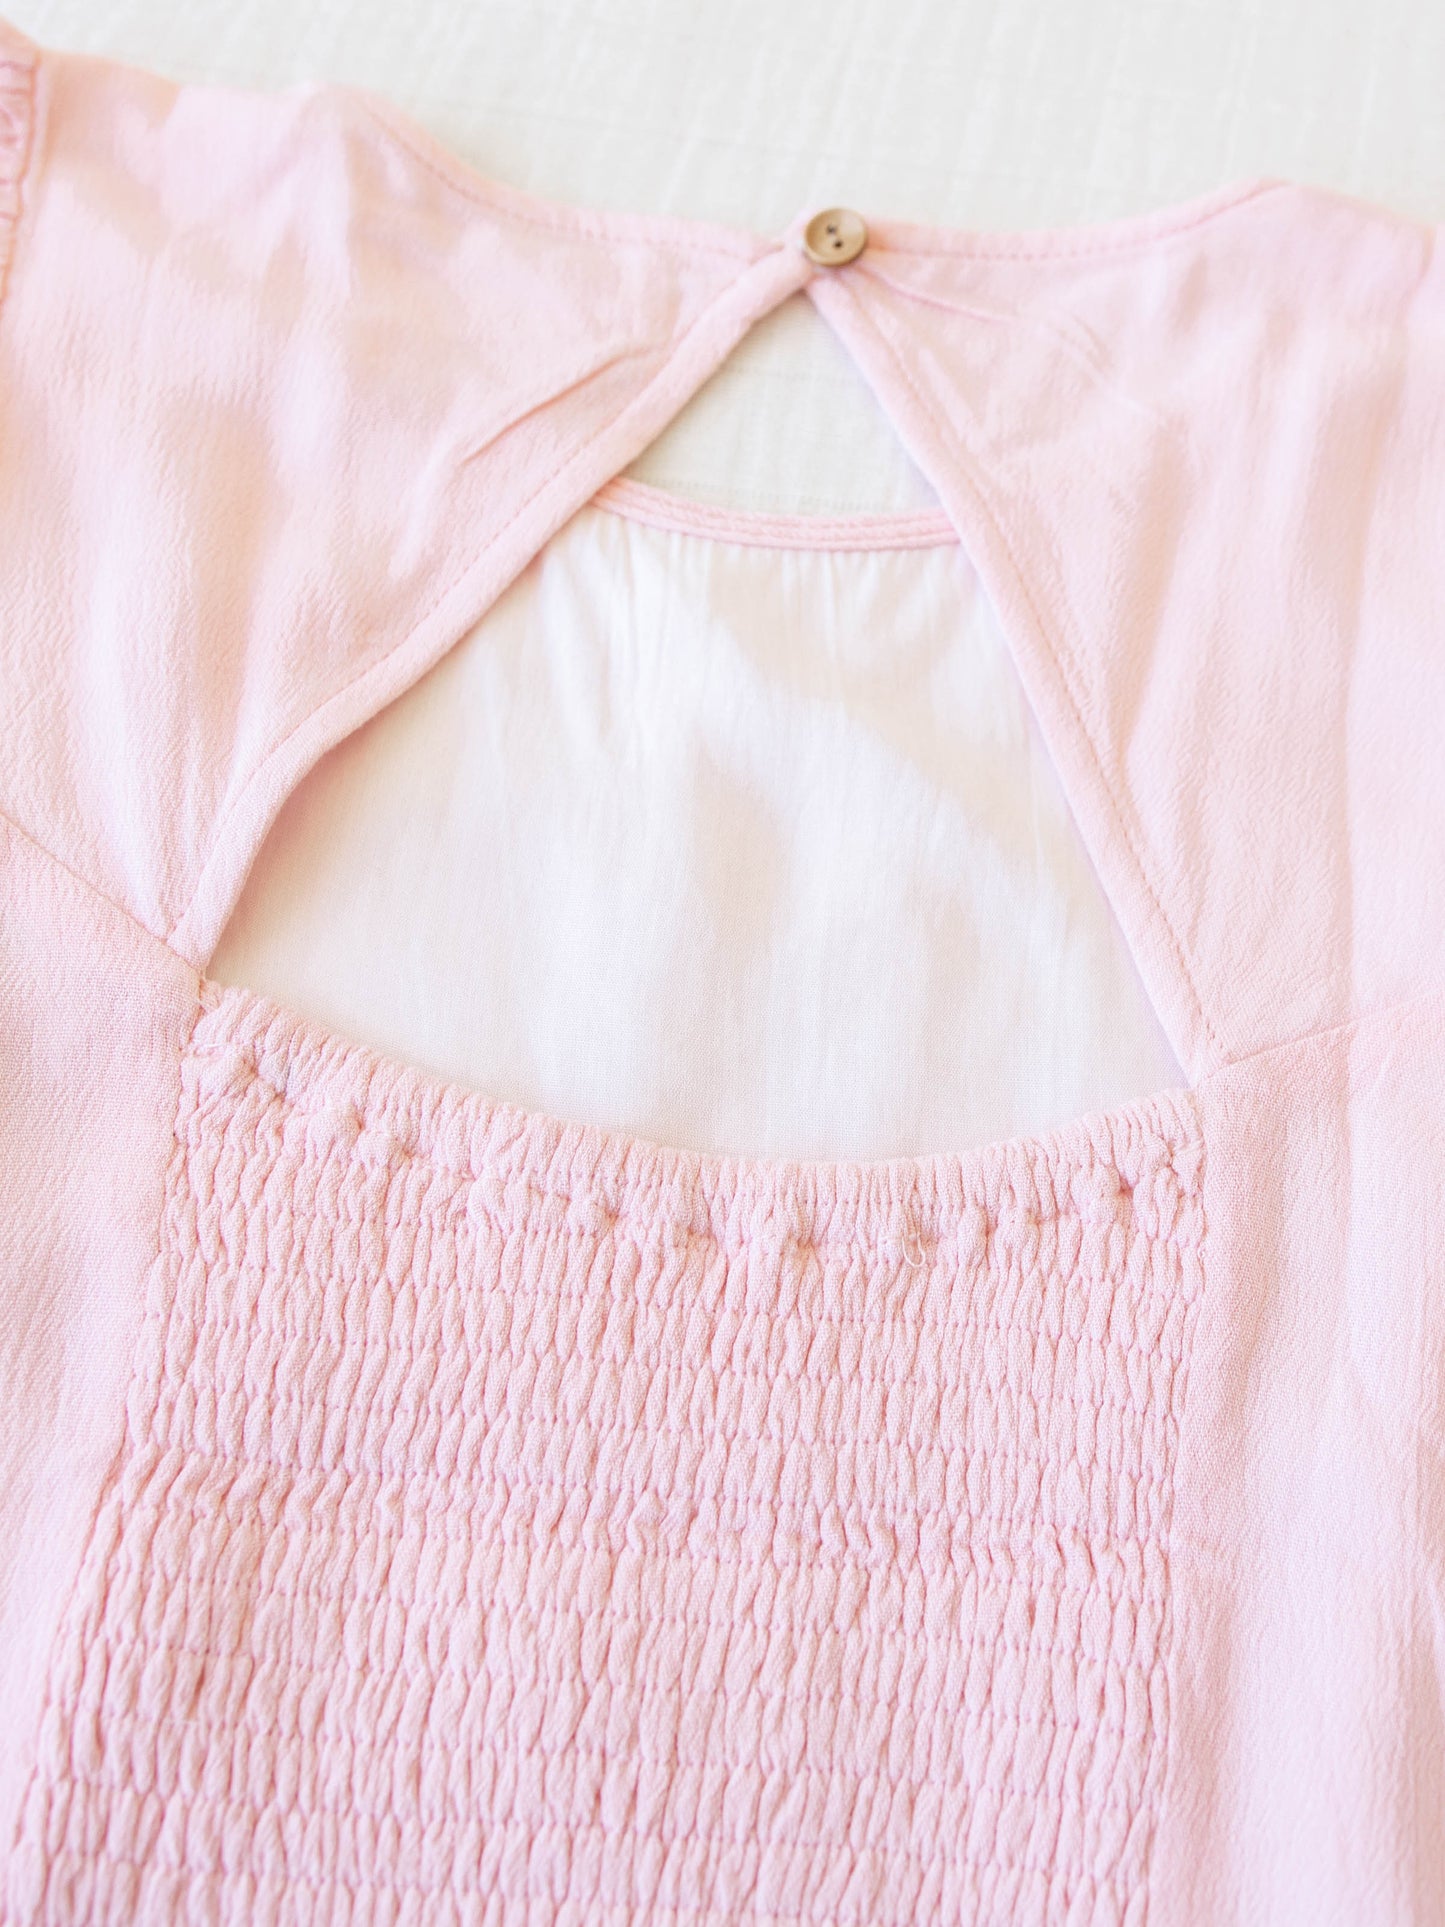 Closeup of the smocked and keyhole back